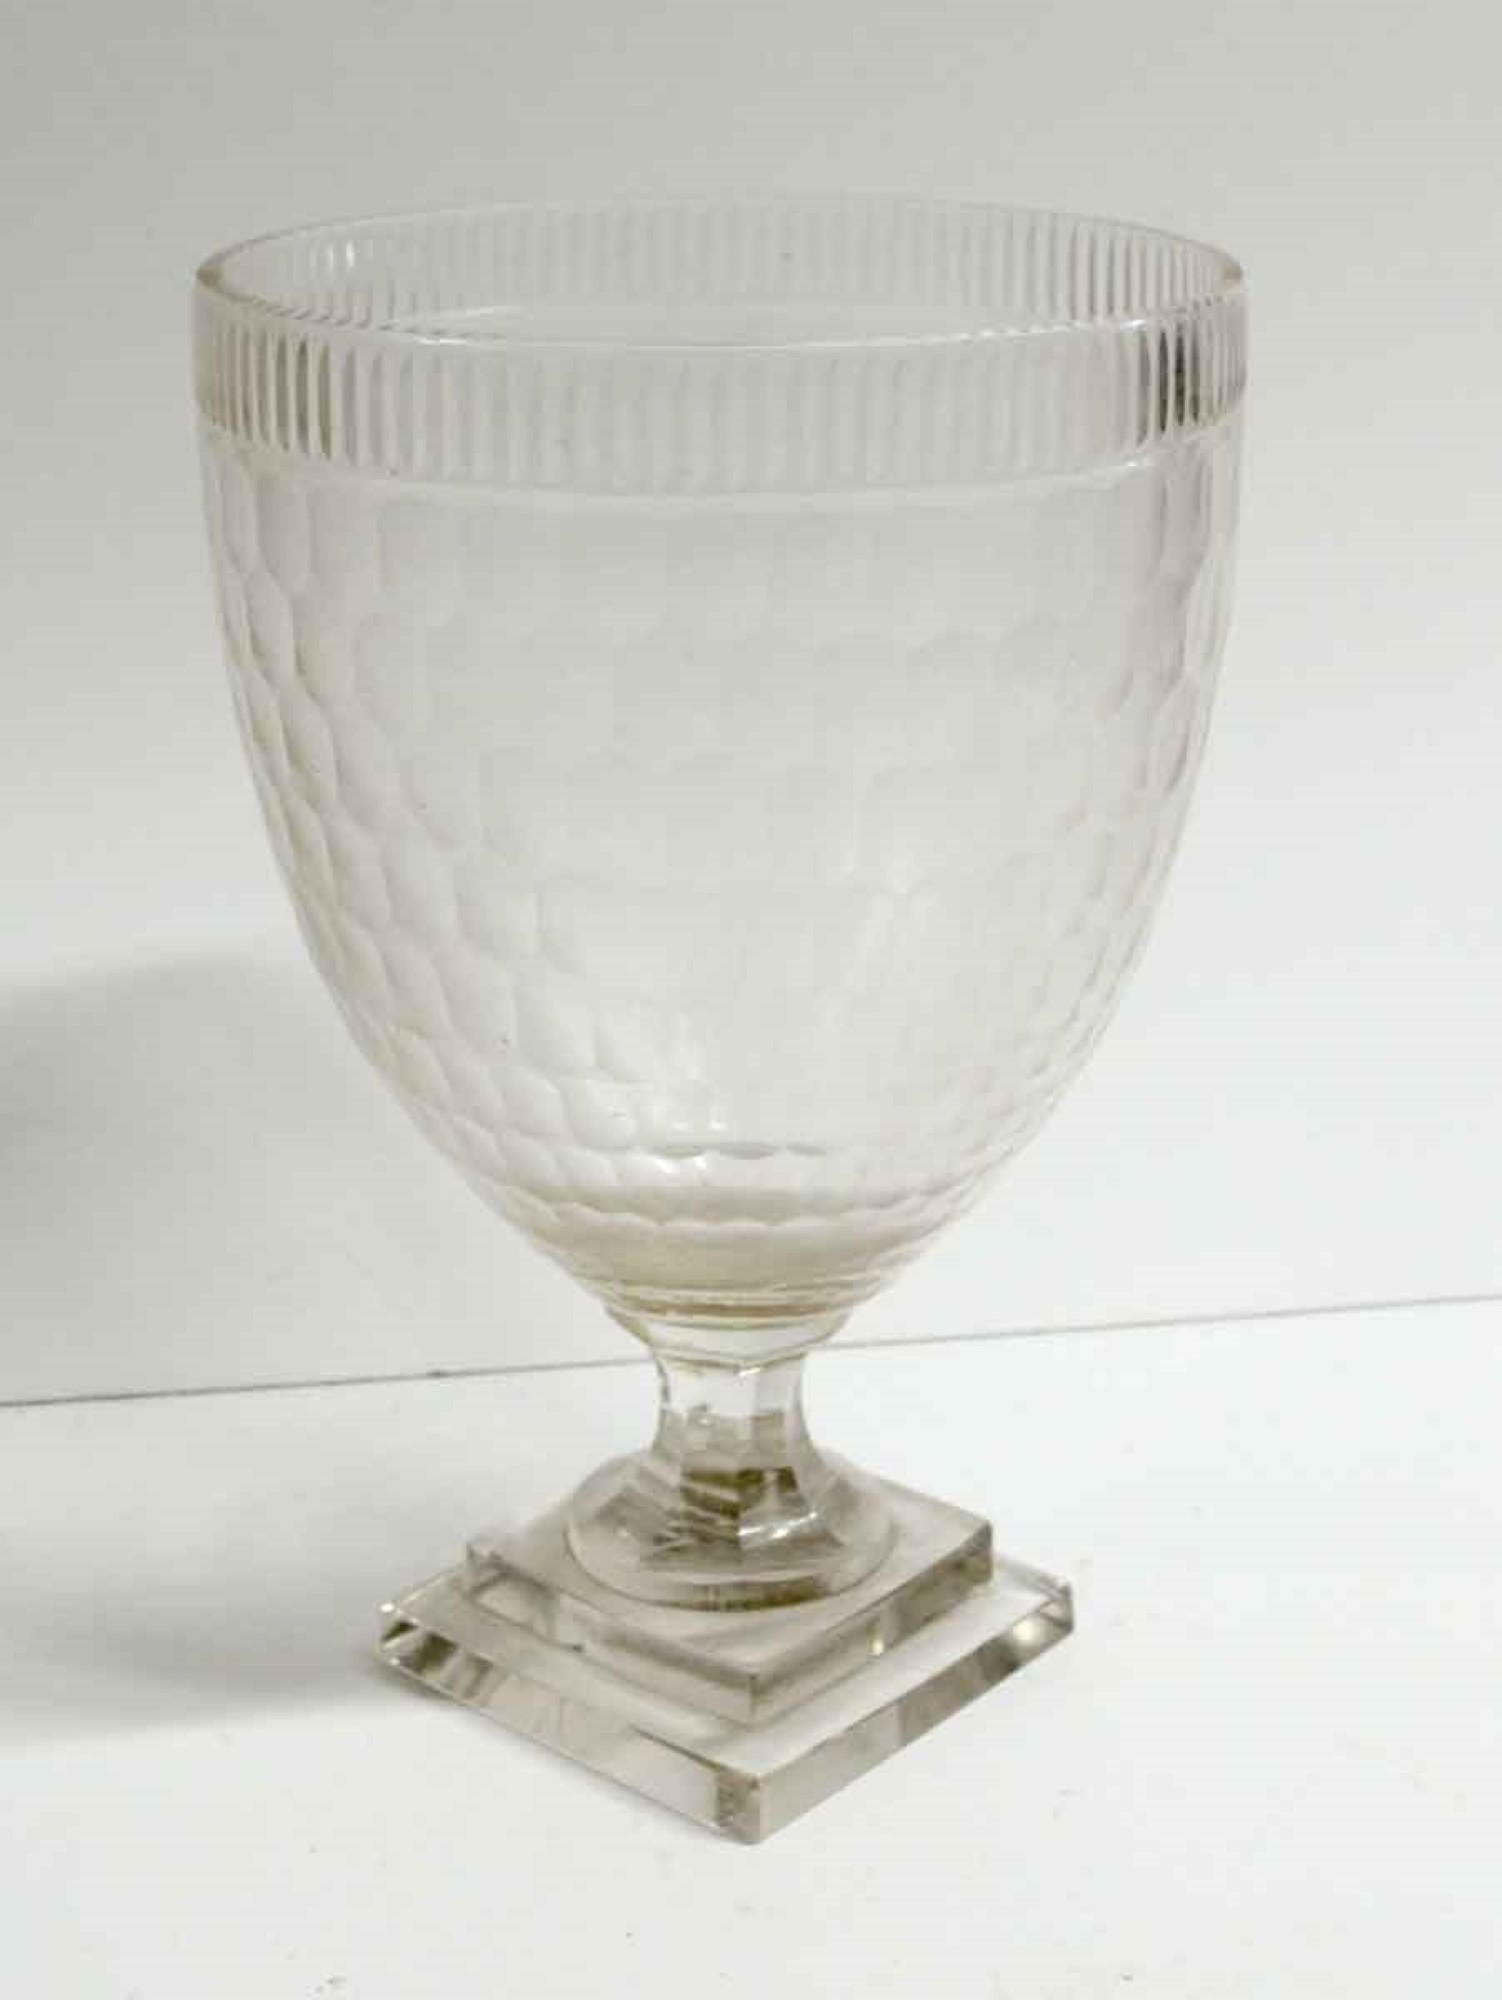 Clear crystal honeycomb pattern vase and two-tier square base from the 2000s. Small quantity available at time of posting. Priced each. Please inquire. Please note, this item is located in our Scranton, PA location.